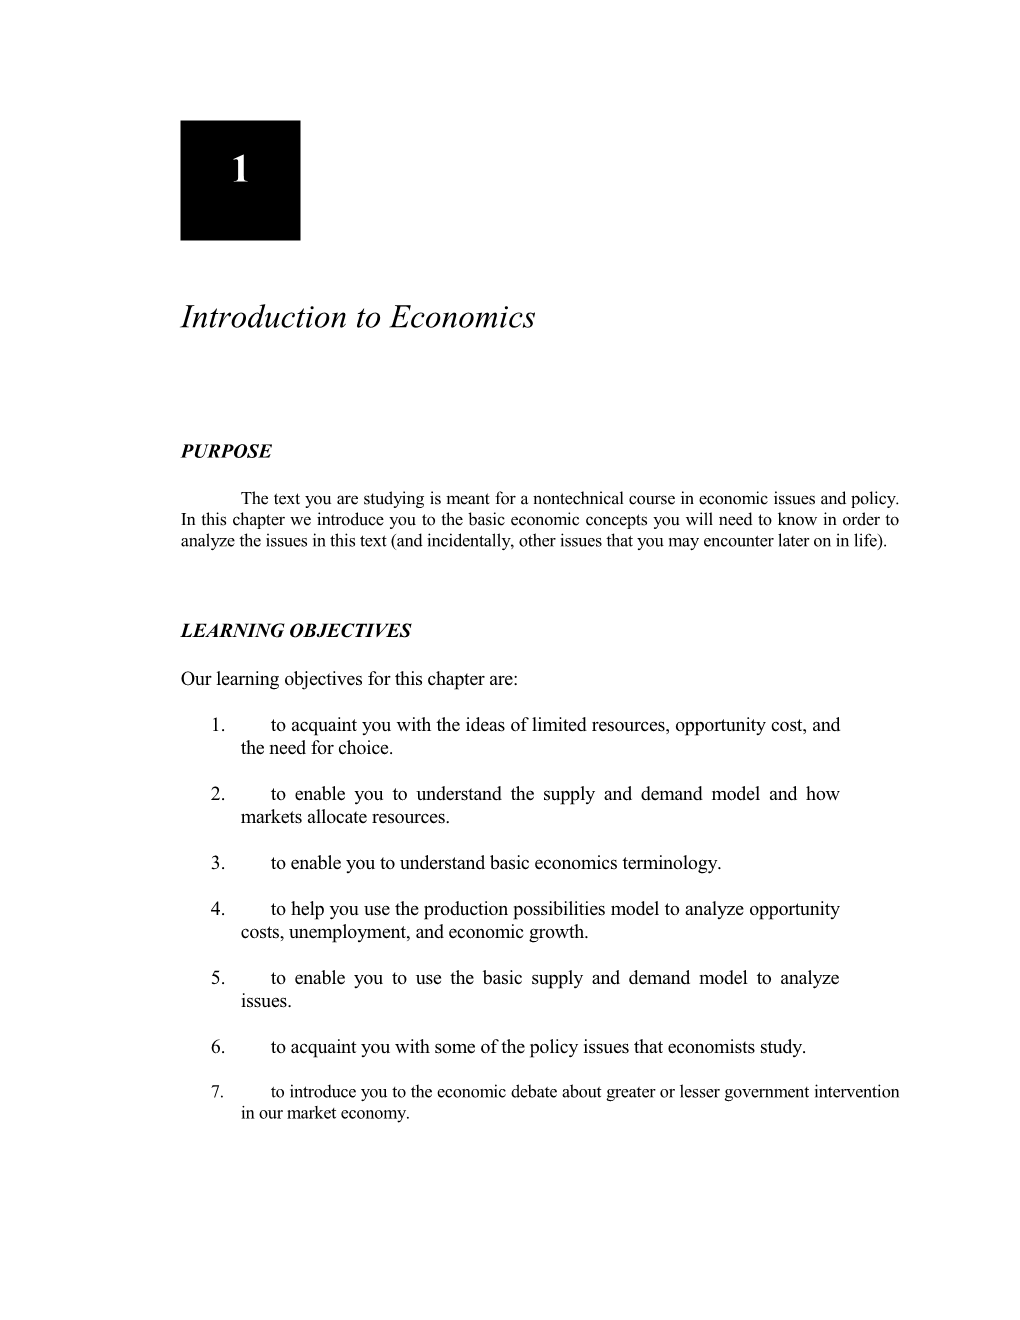 Chapter 1 Introduction to Economics